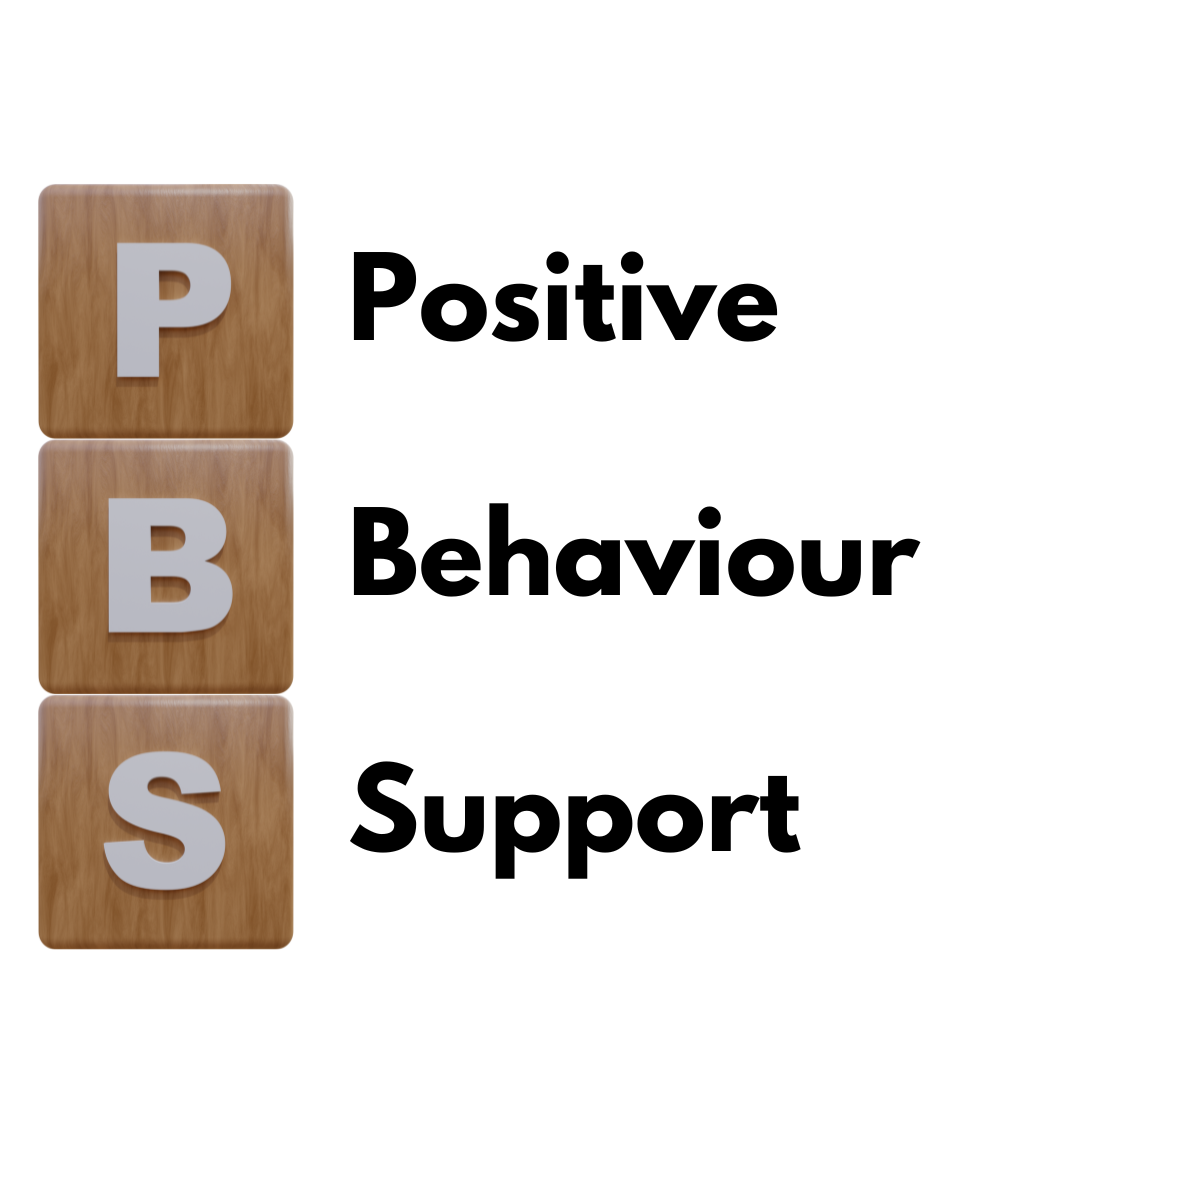 Positive Behaviour Support in Social Care